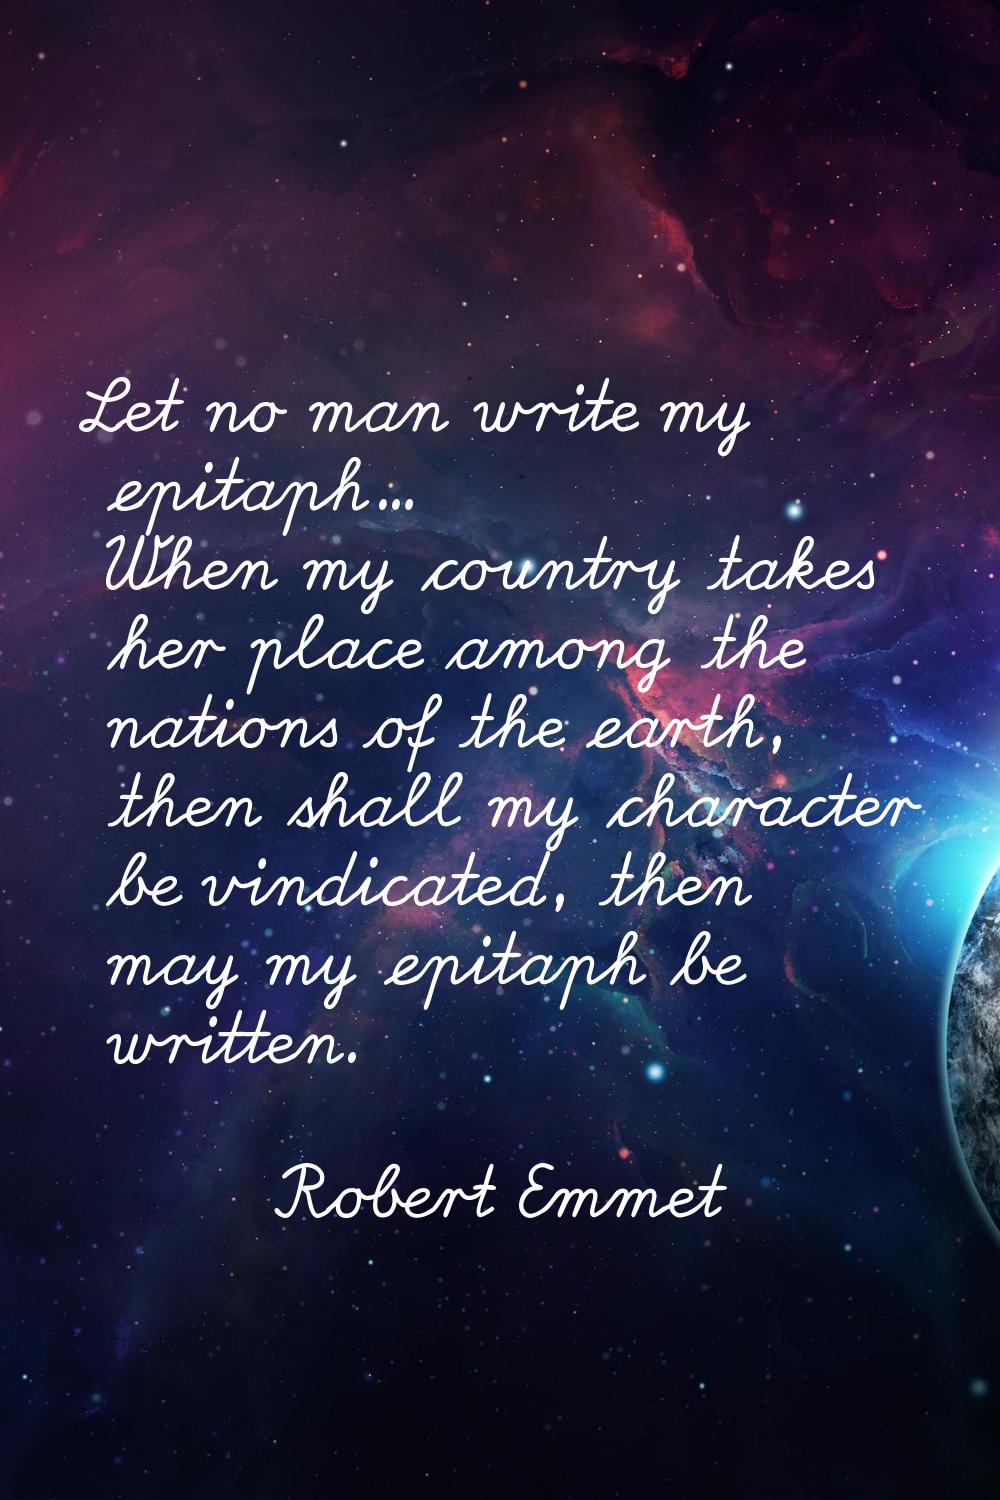 Let no man write my epitaph... When my country takes her place among the nations of the earth, then